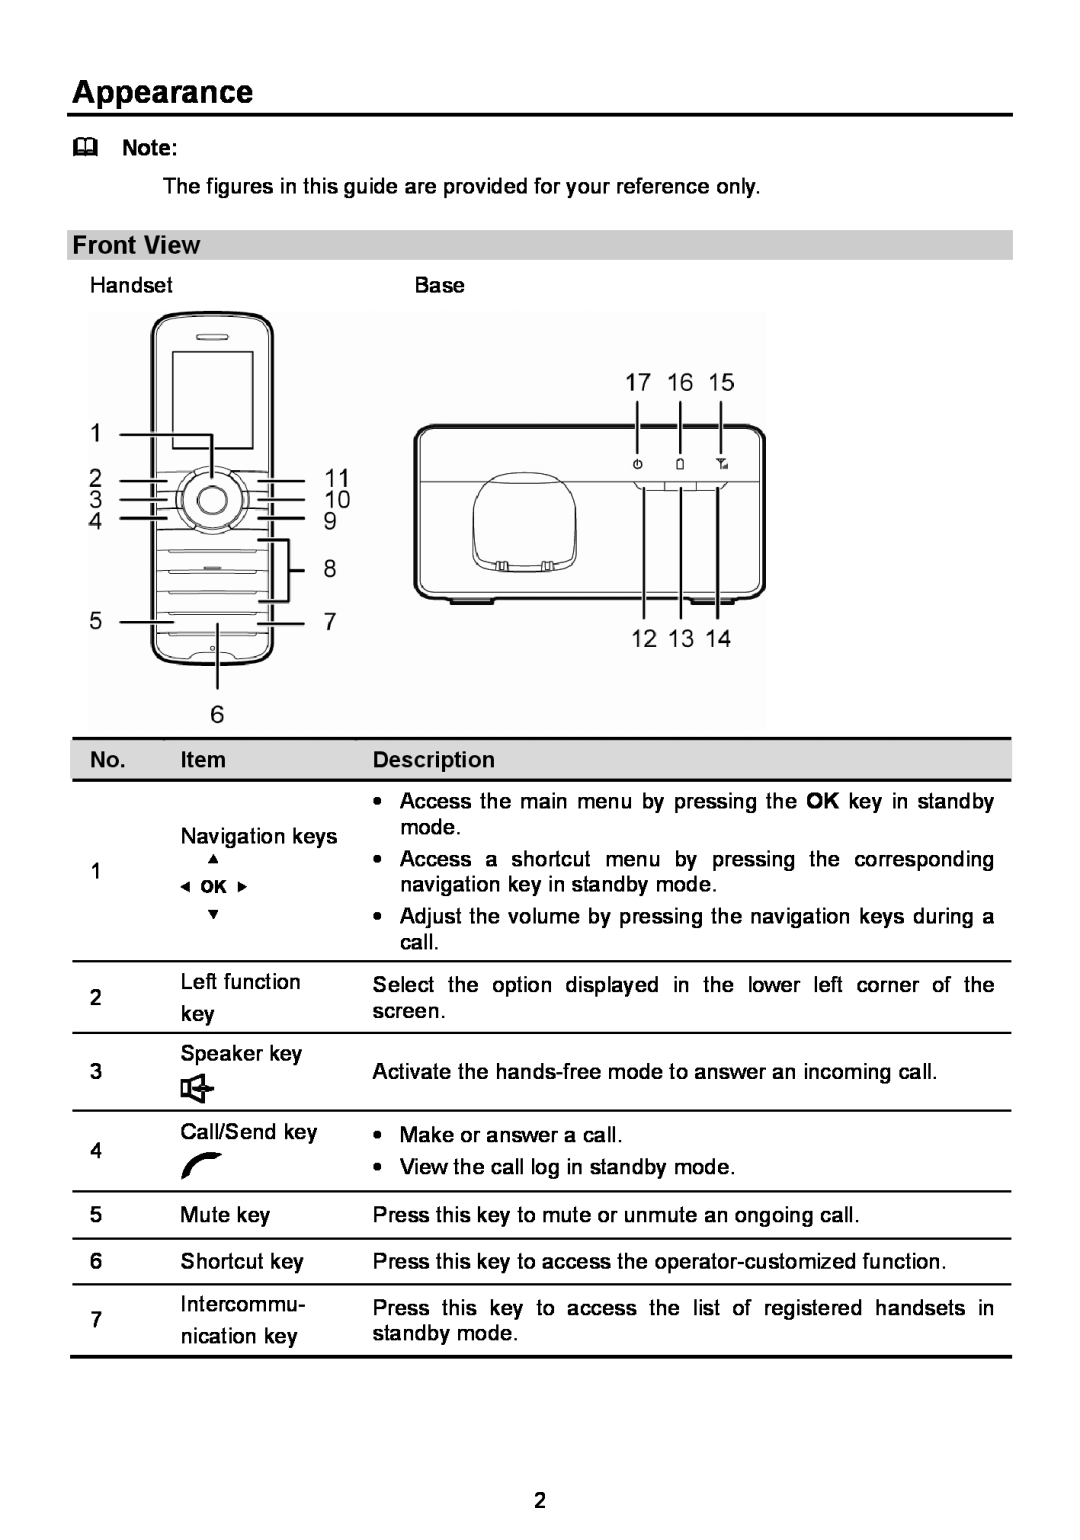 Huawei F685 manual Appearance, Front View,  Note, Description 